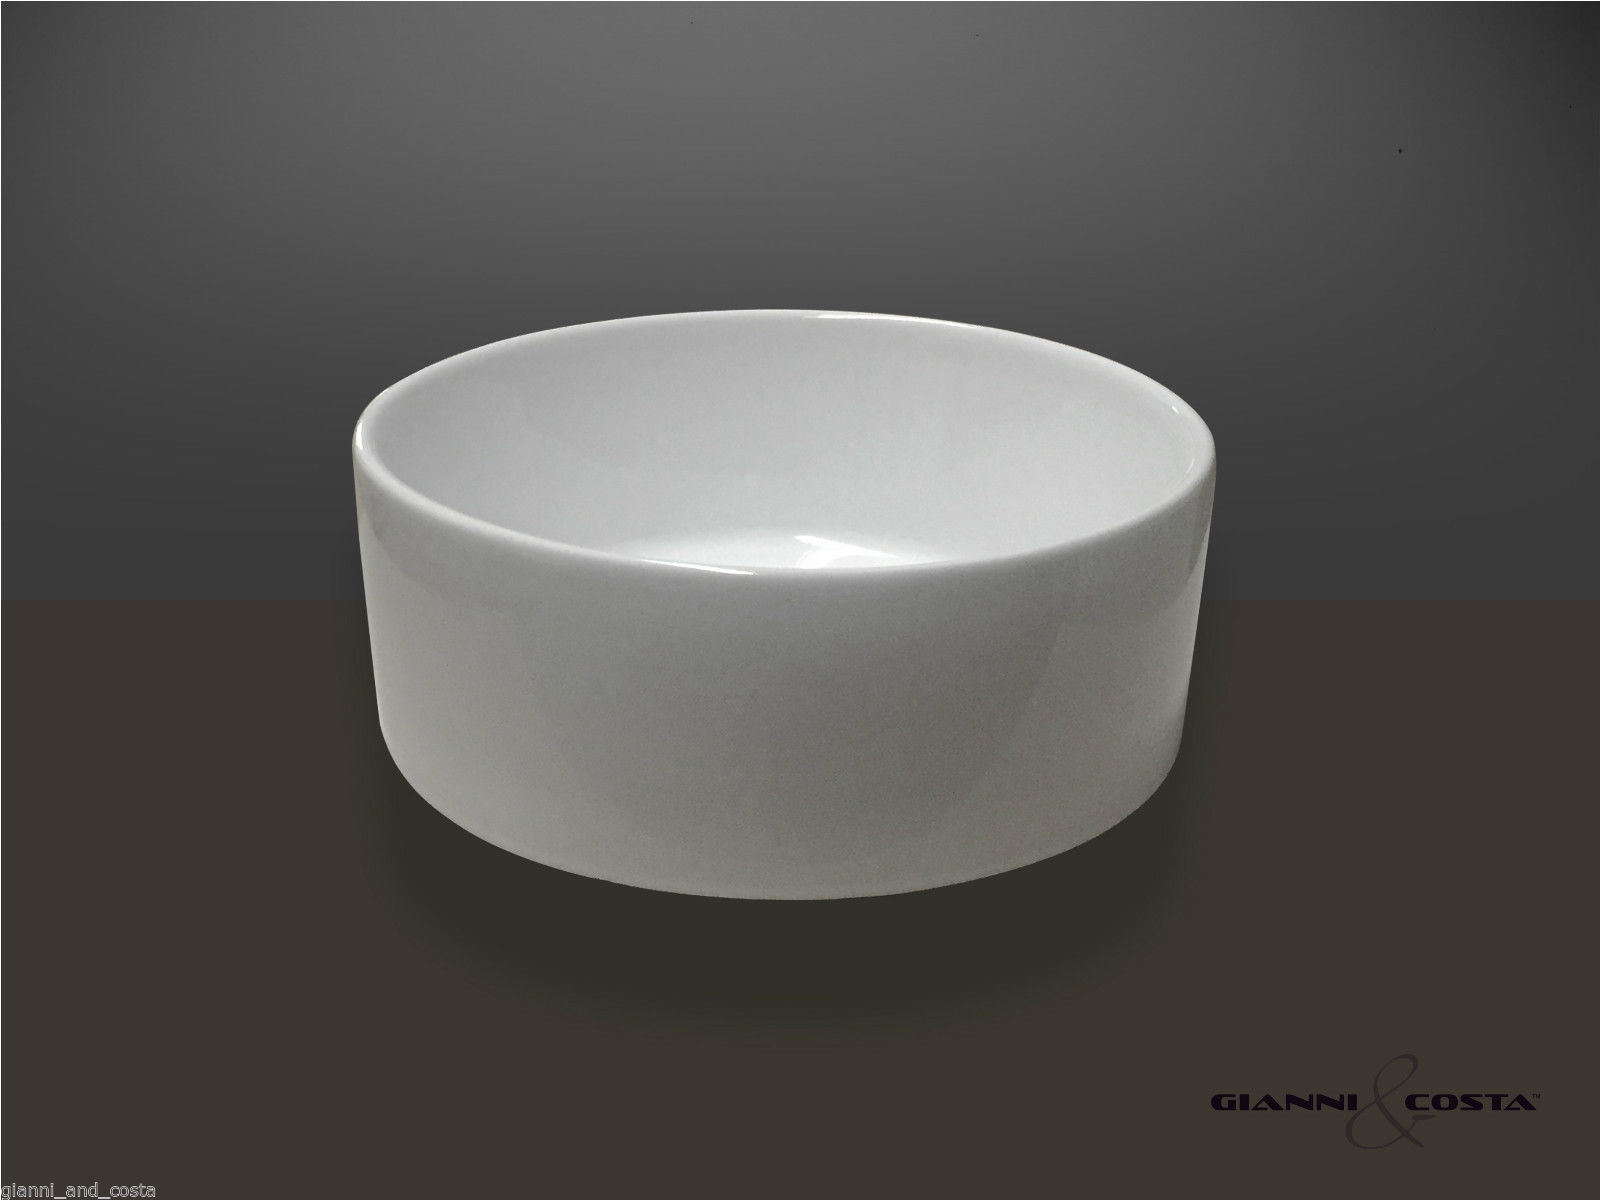  CERAMIC ROUND ABOVE COUNTER TOP BASIN FOR VANITY INCLUDES POP UP WASTE